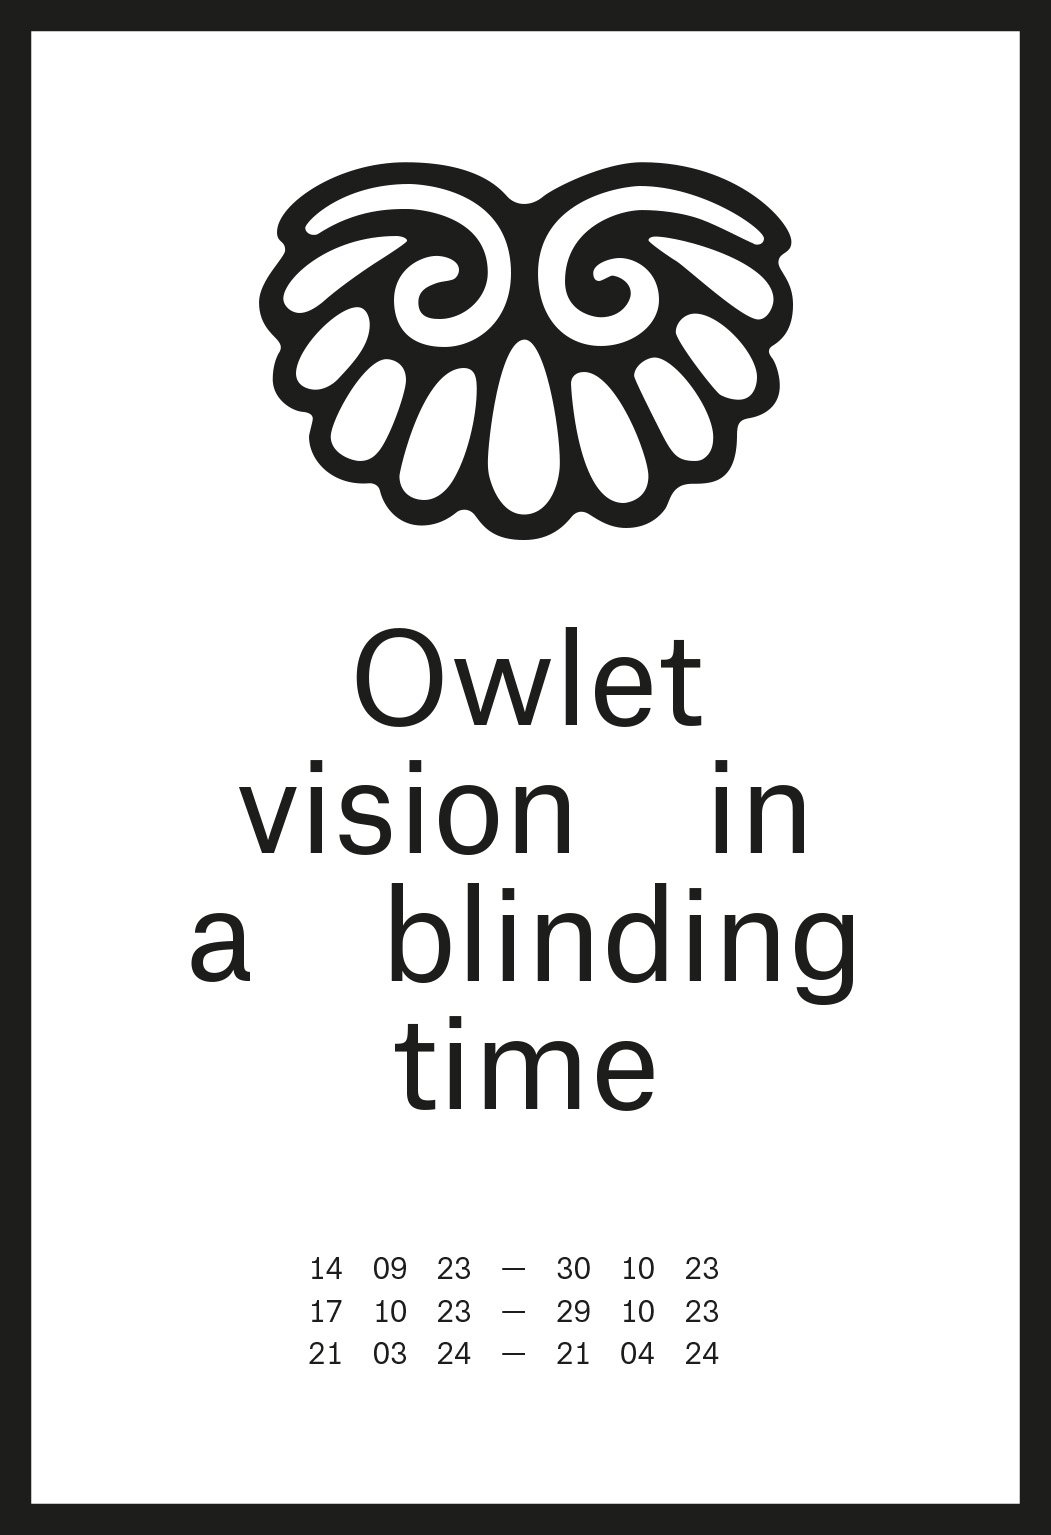 Owlet vision in a blinding time — Part I  / 14 09 23 — 30 10 23